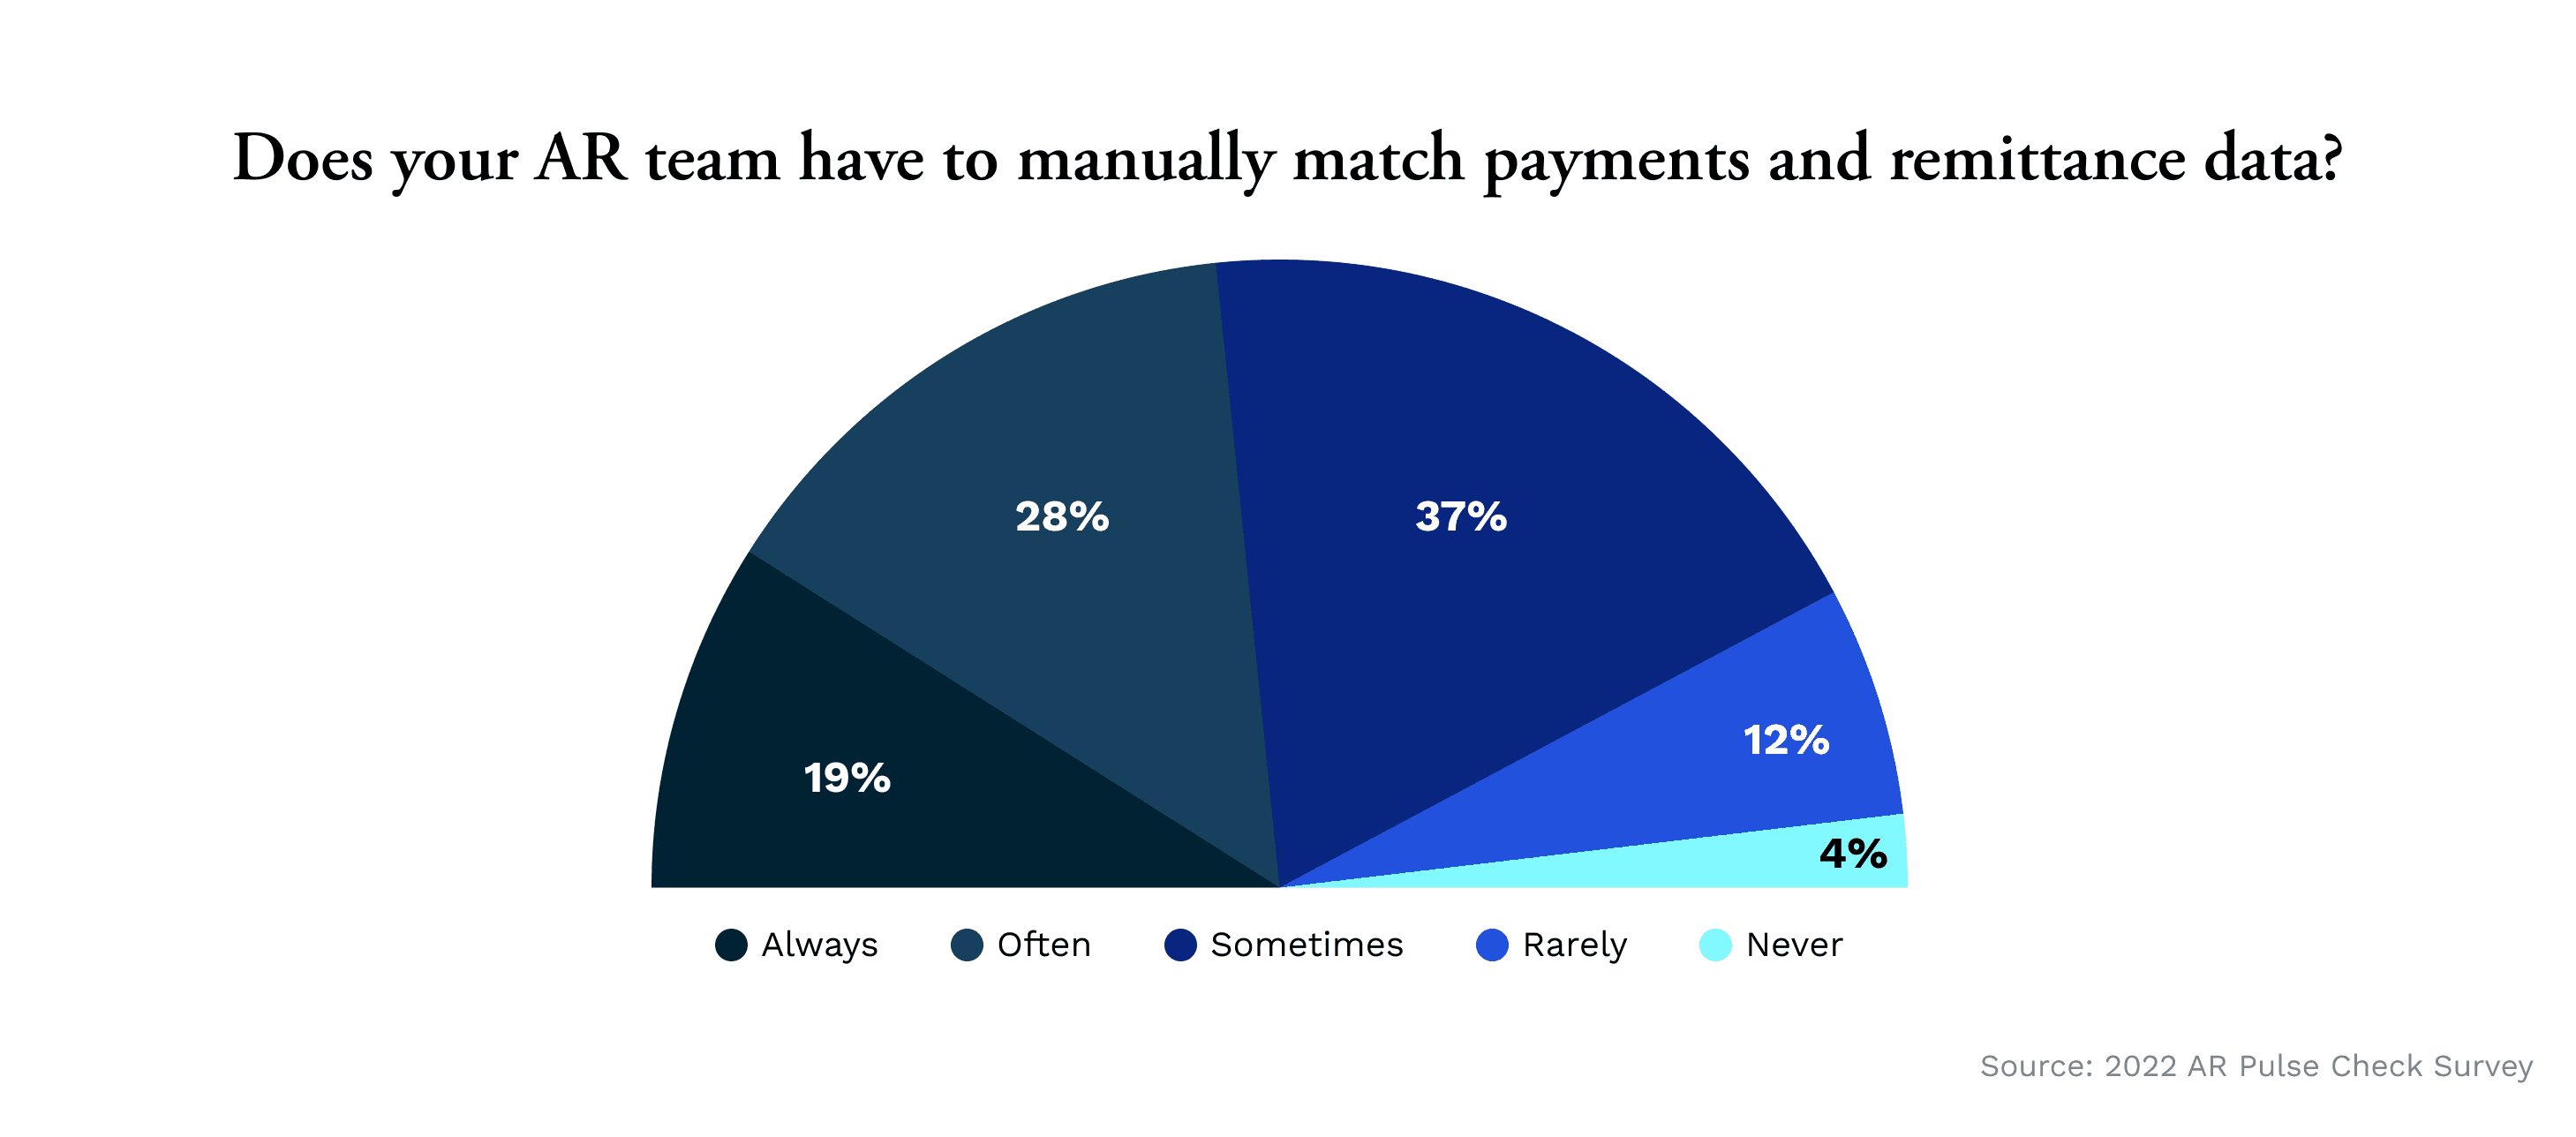 Percentage of AR teams manually matching payments and remittance data